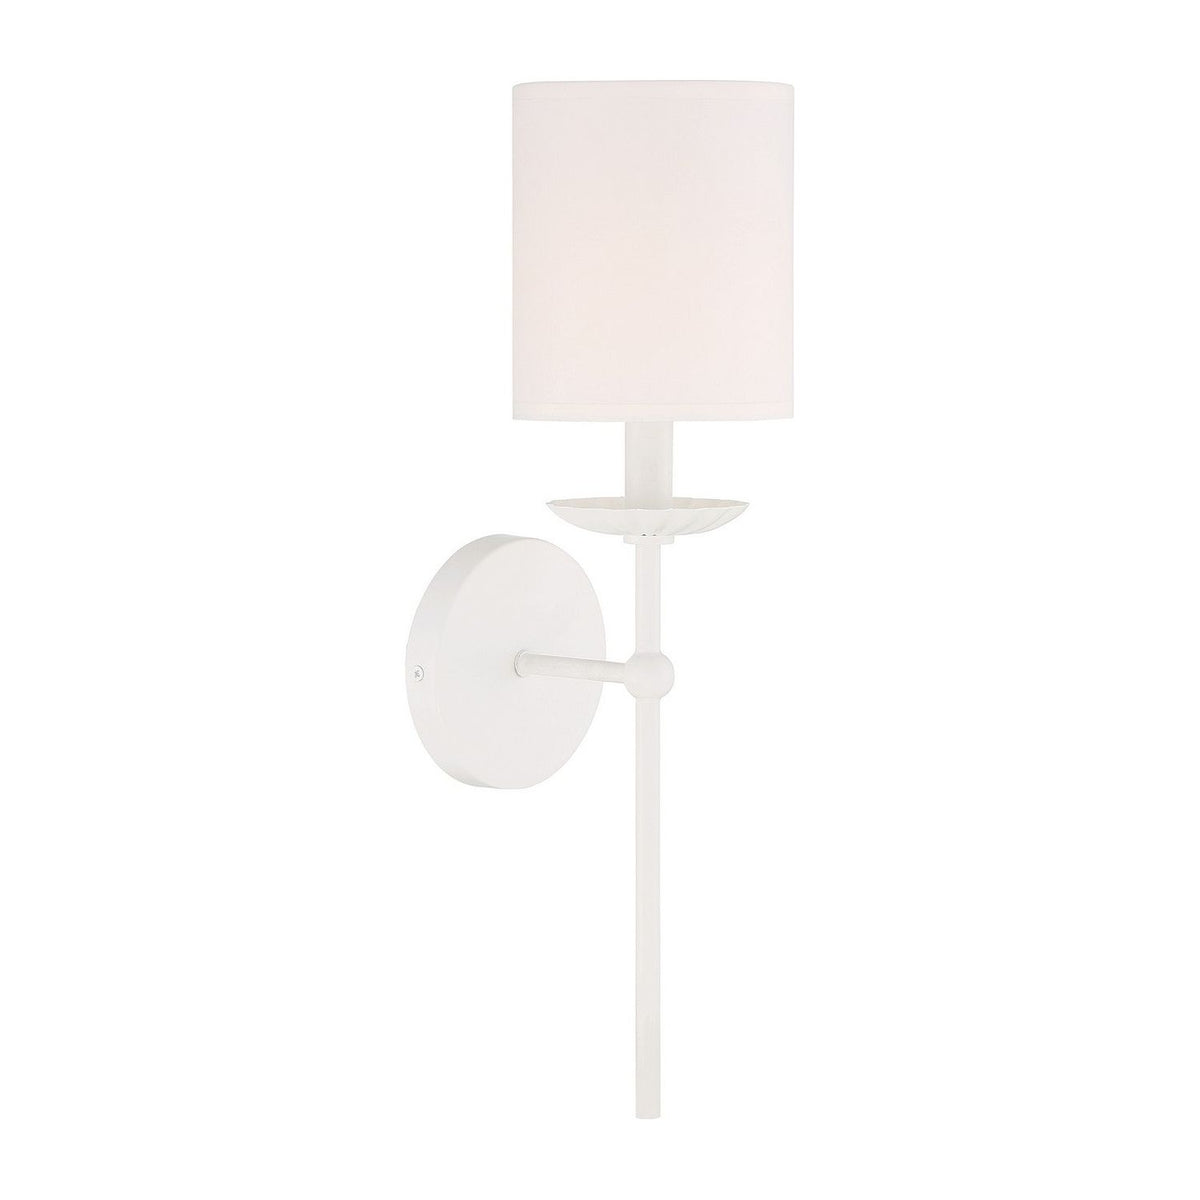 Meridian - M90079WH - One Light Wall Sconce - White